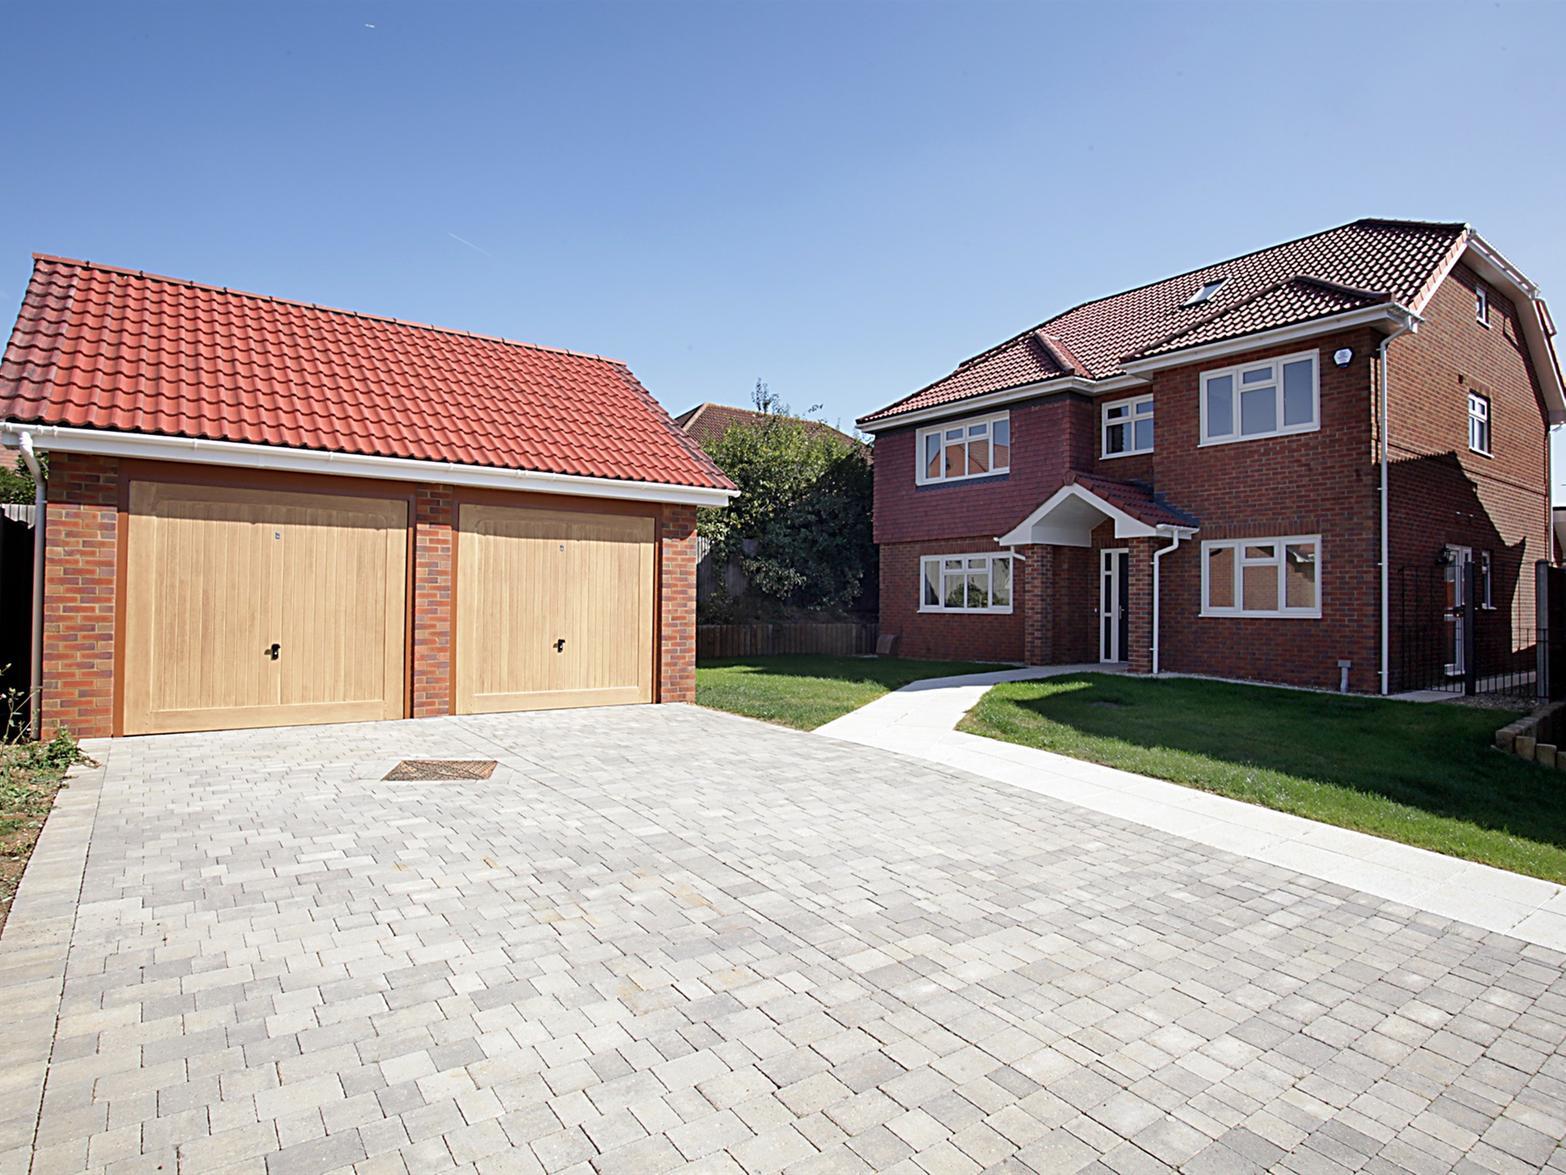 Felstead Way, Luton LU2. This brand new home features a garage, two en-suites plus a family bathroom, six bedrooms and two receptions rooms. Property agent: Connells